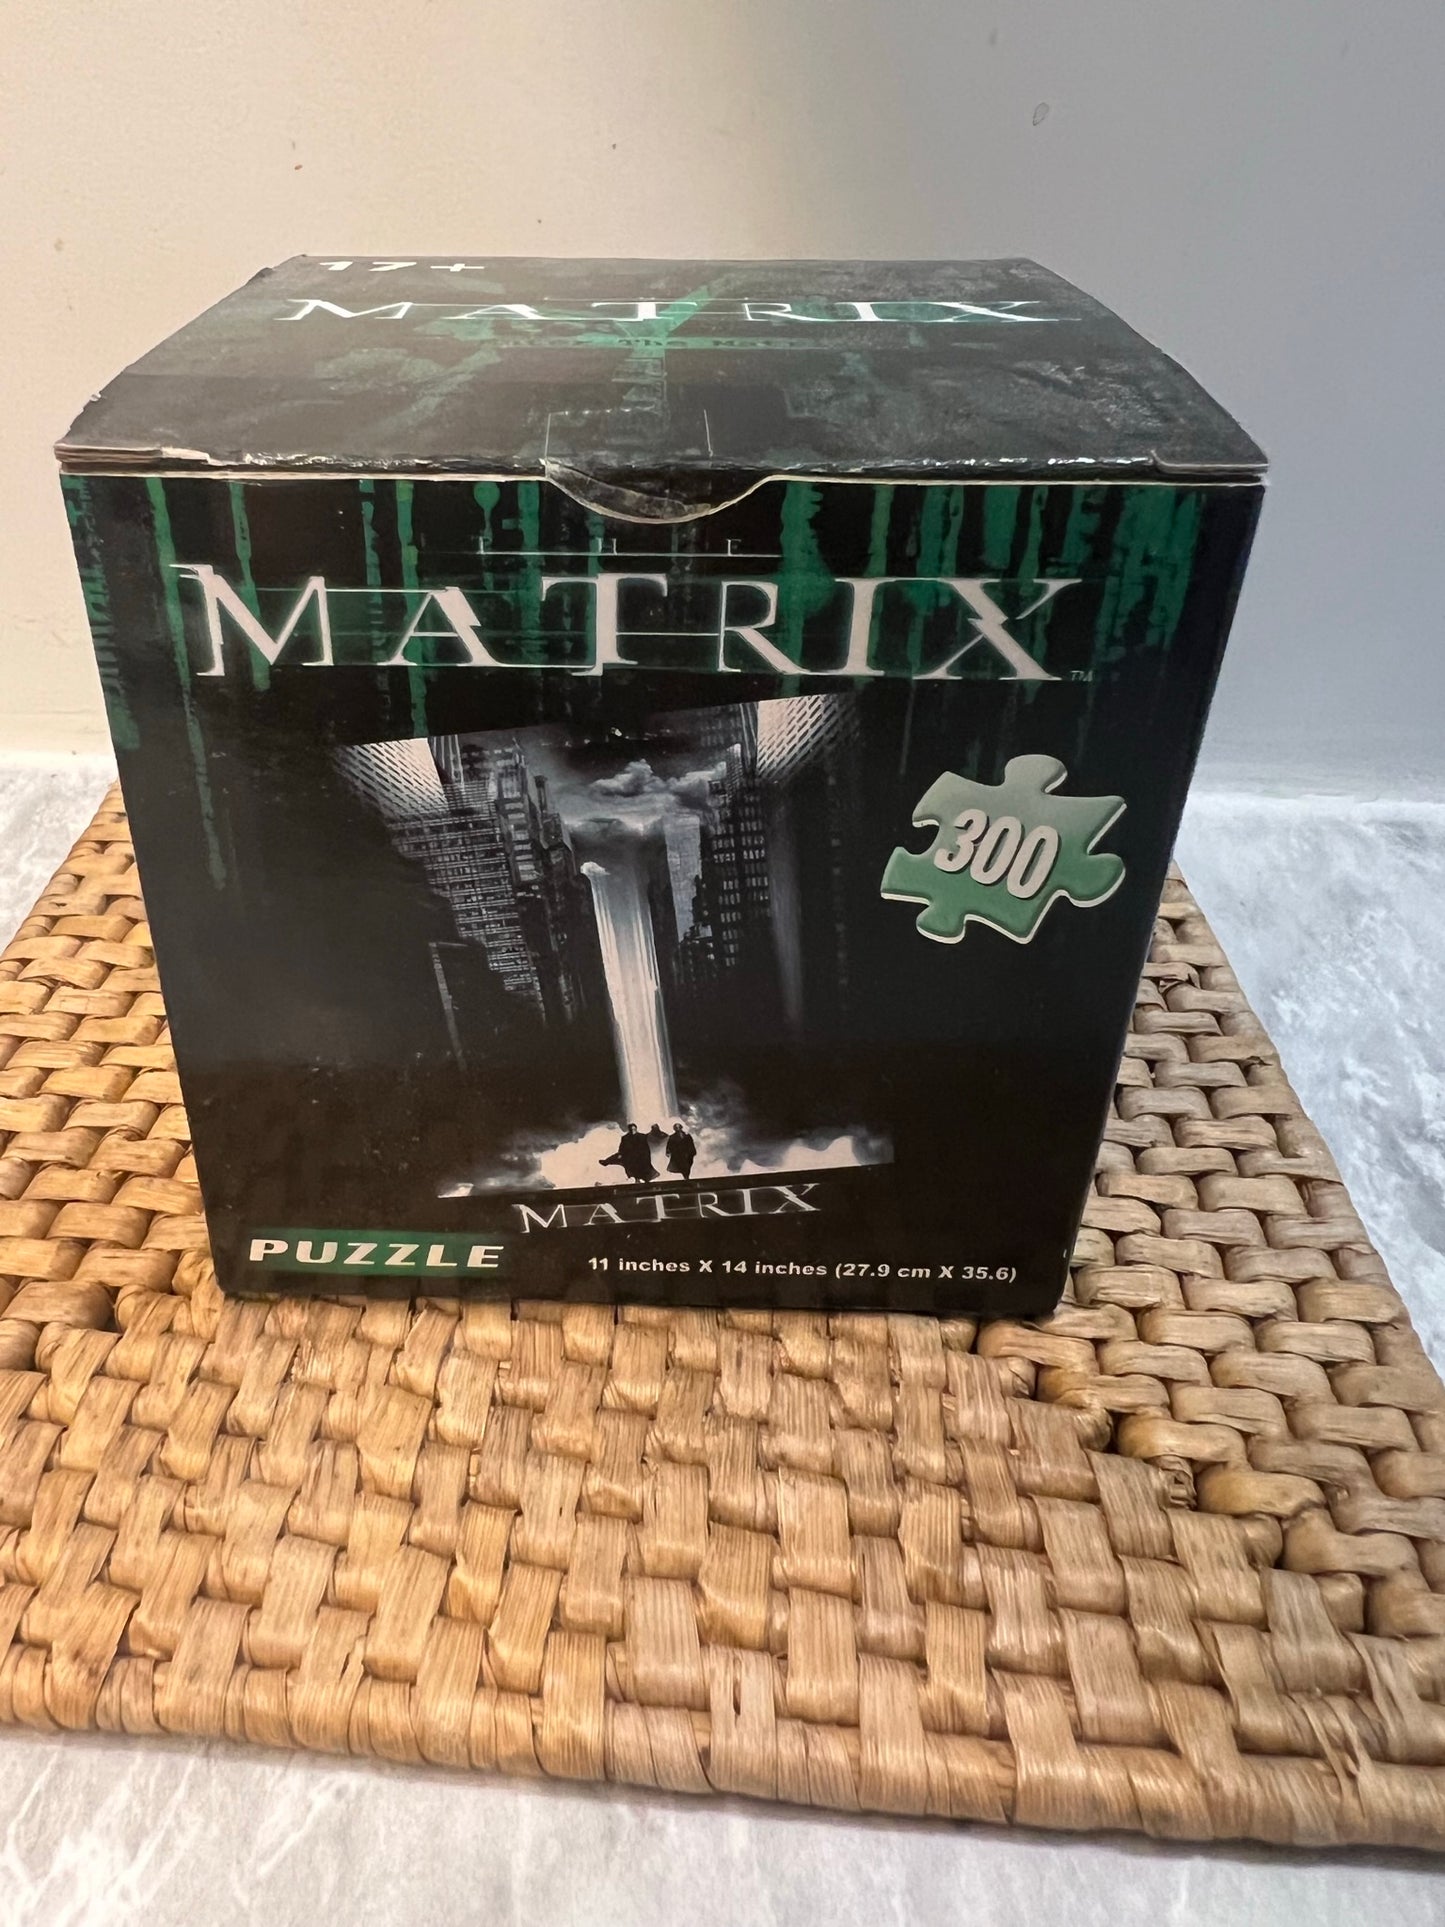 The Matrix Loot Crate 300 Piece Jigsaw Puzzle New 11 Inches by 14 Inches